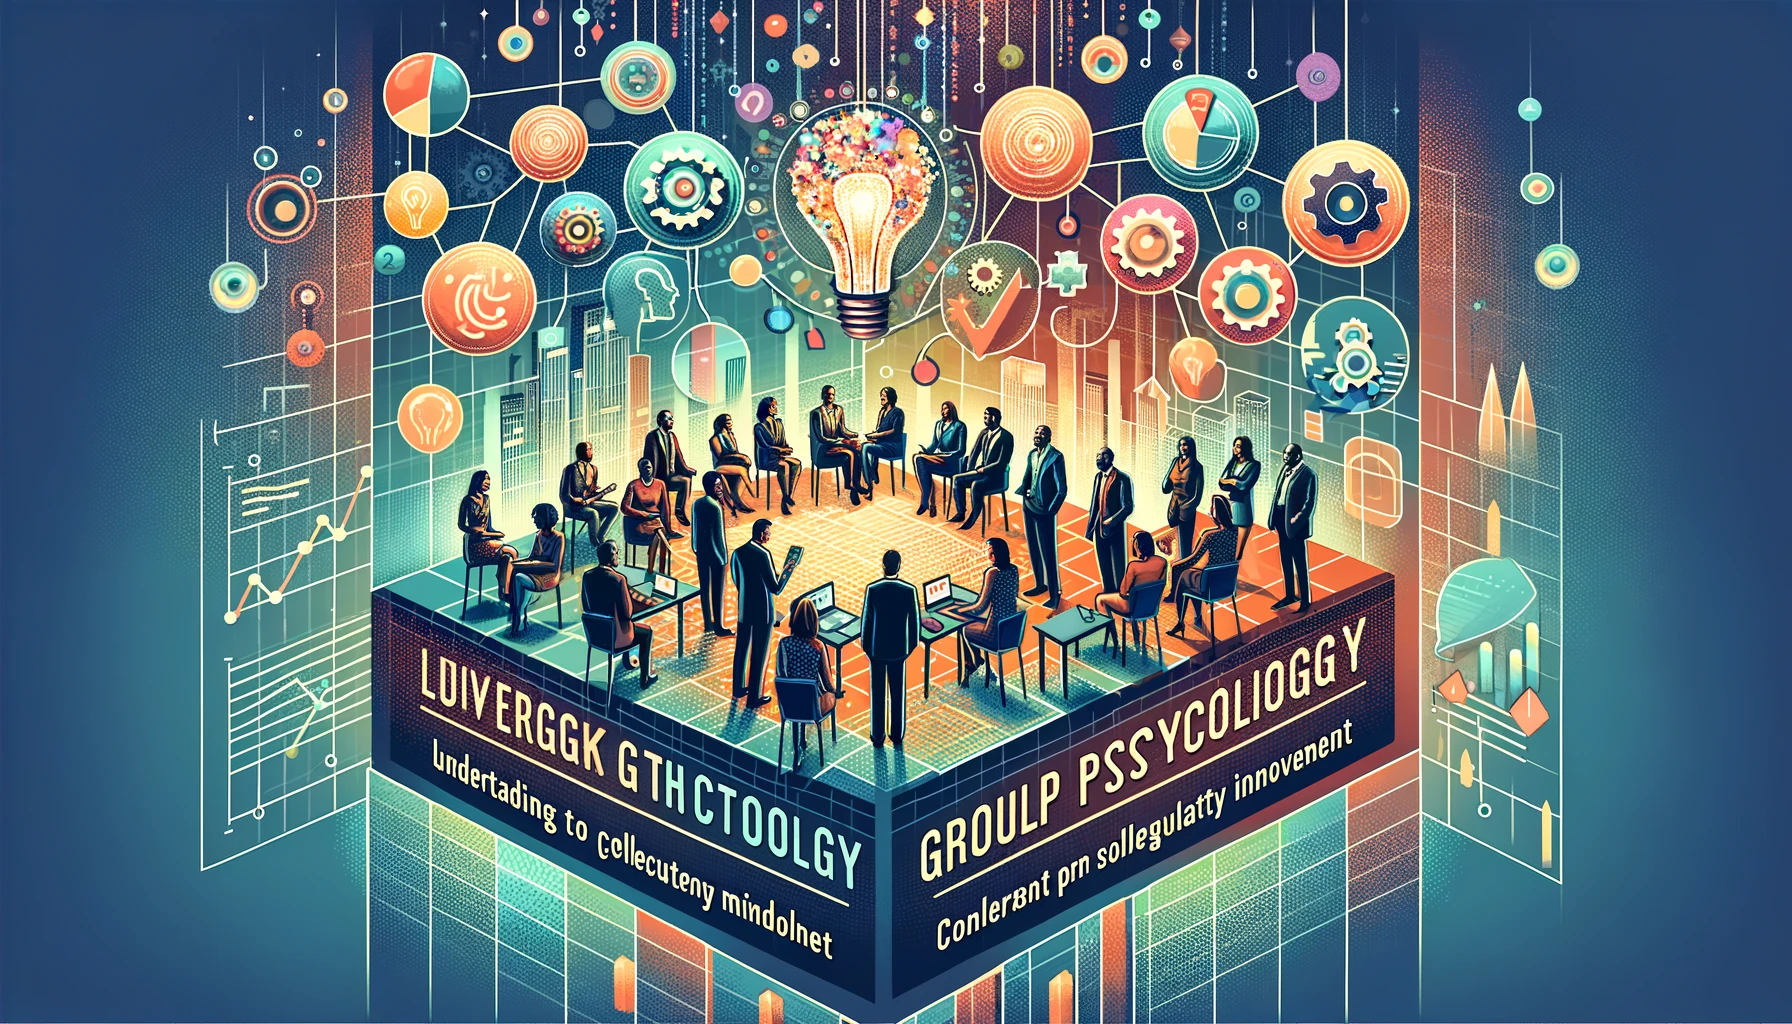 group psychology for business success